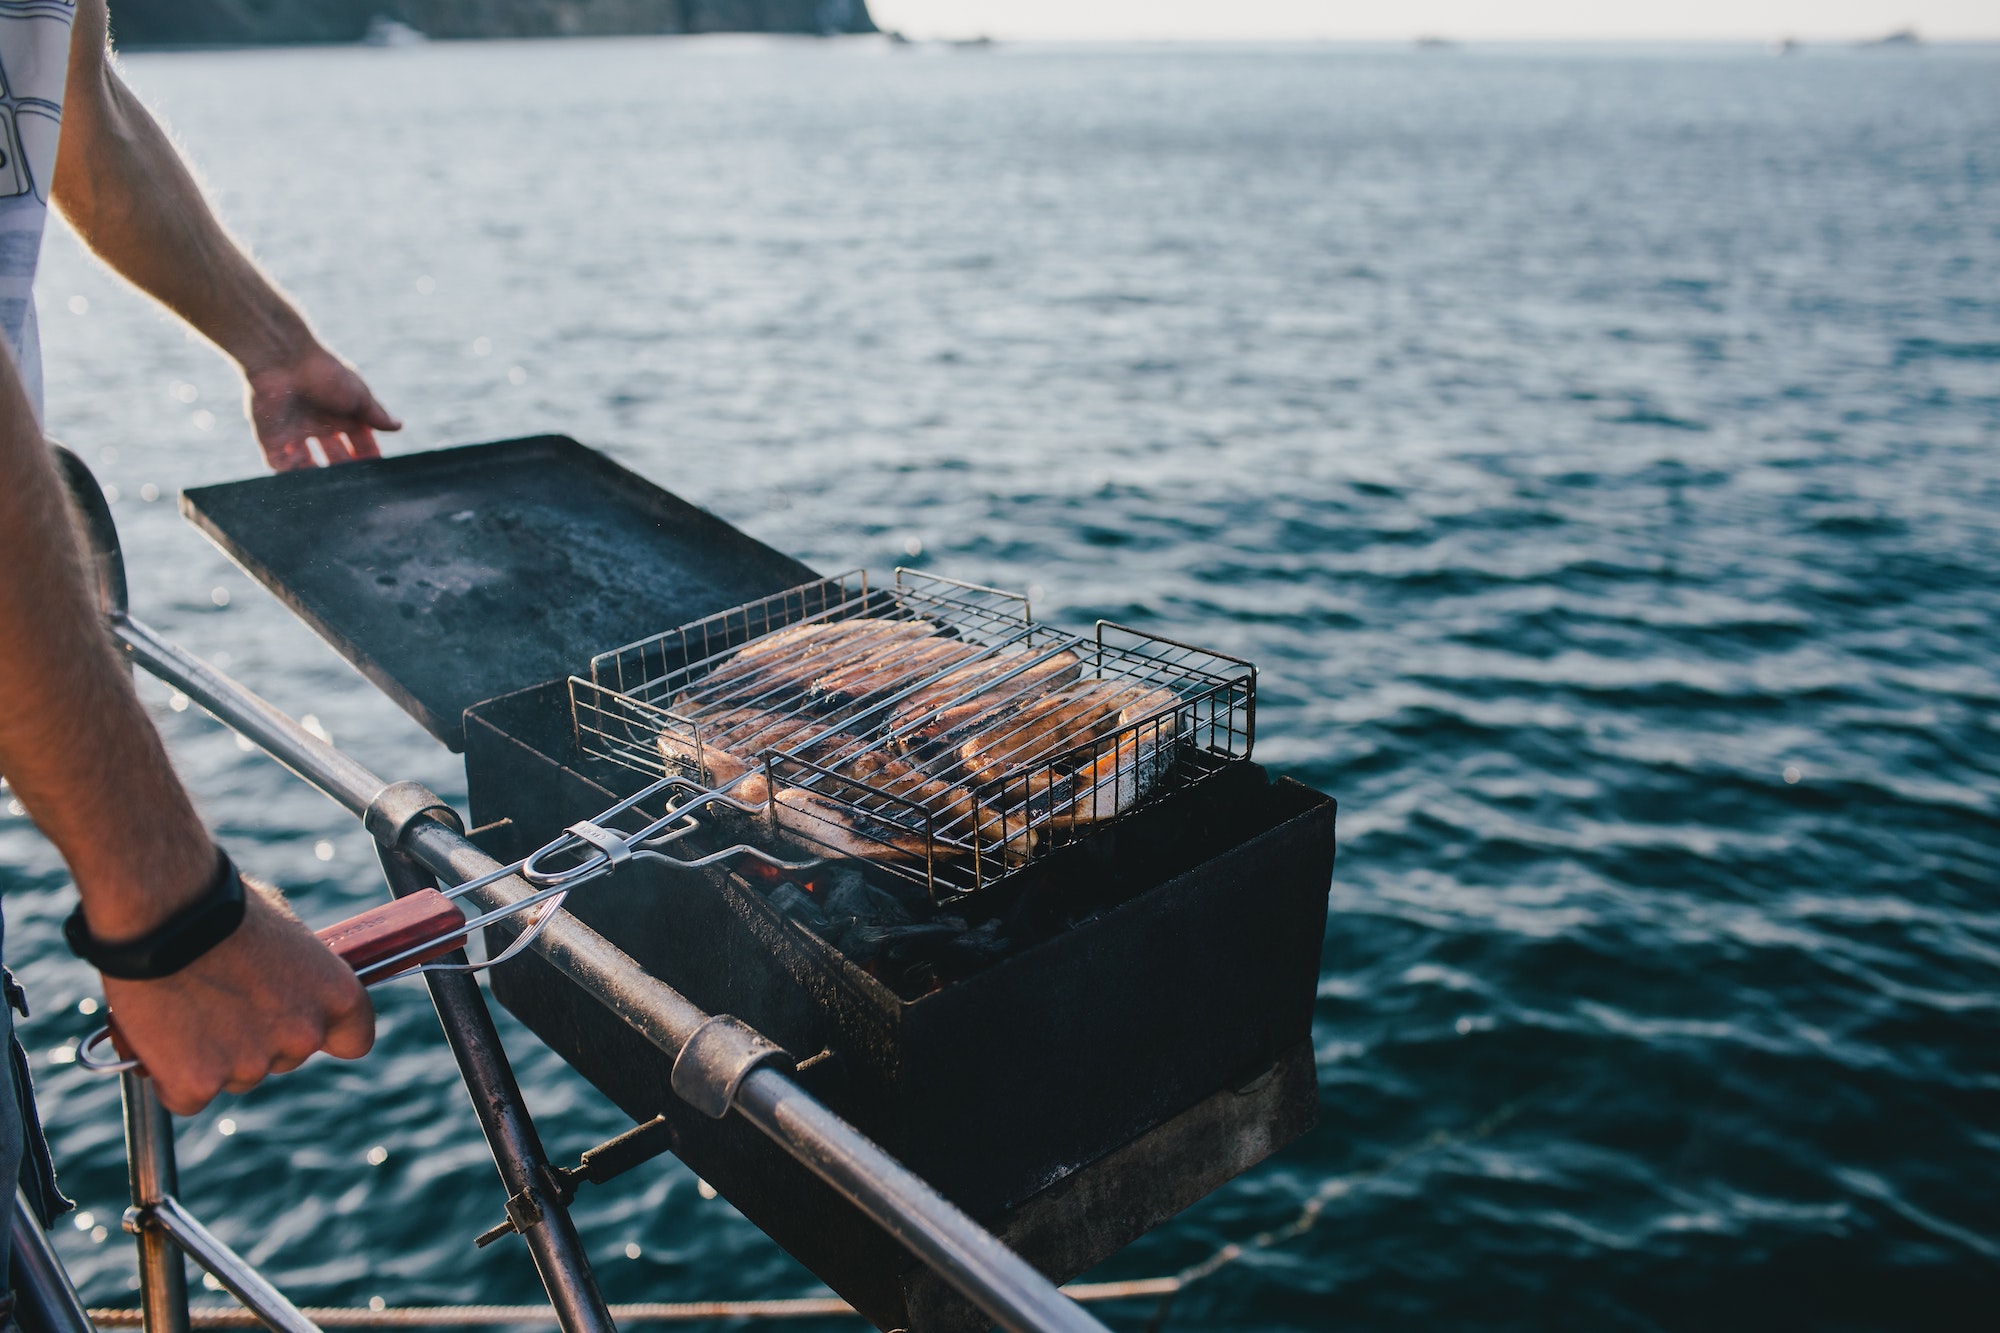 Man making barbecue fish on boat with beautiful sea view